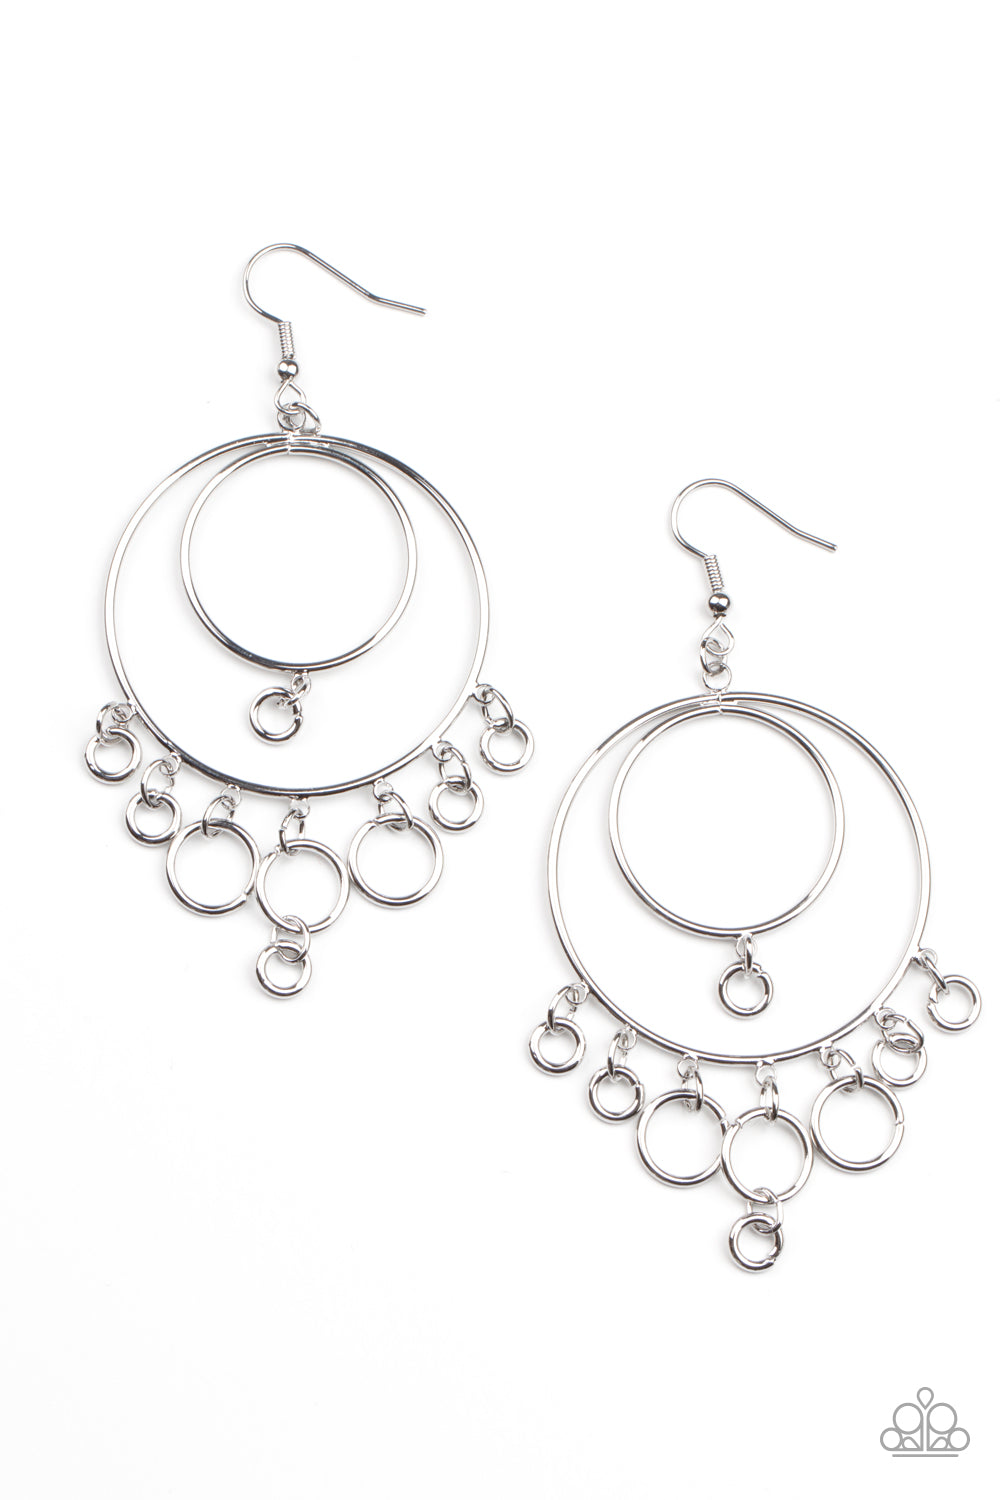 Roundabout Radiance - Silver Earrings - Princess Glam Shop